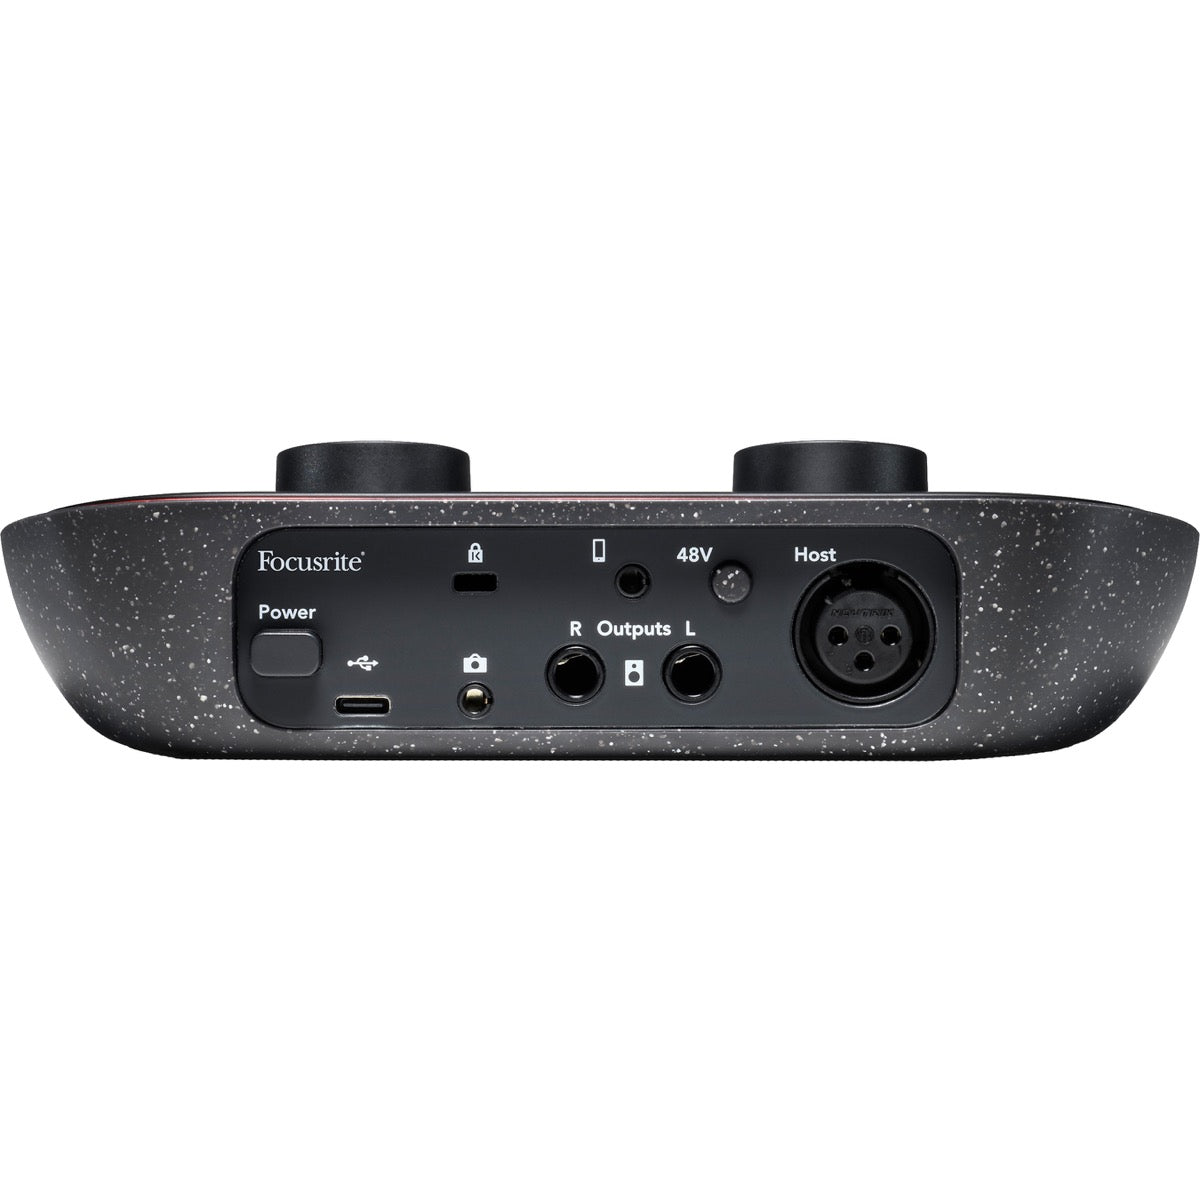 Focusrite Vocaster One Podcast Audio Interface View 3